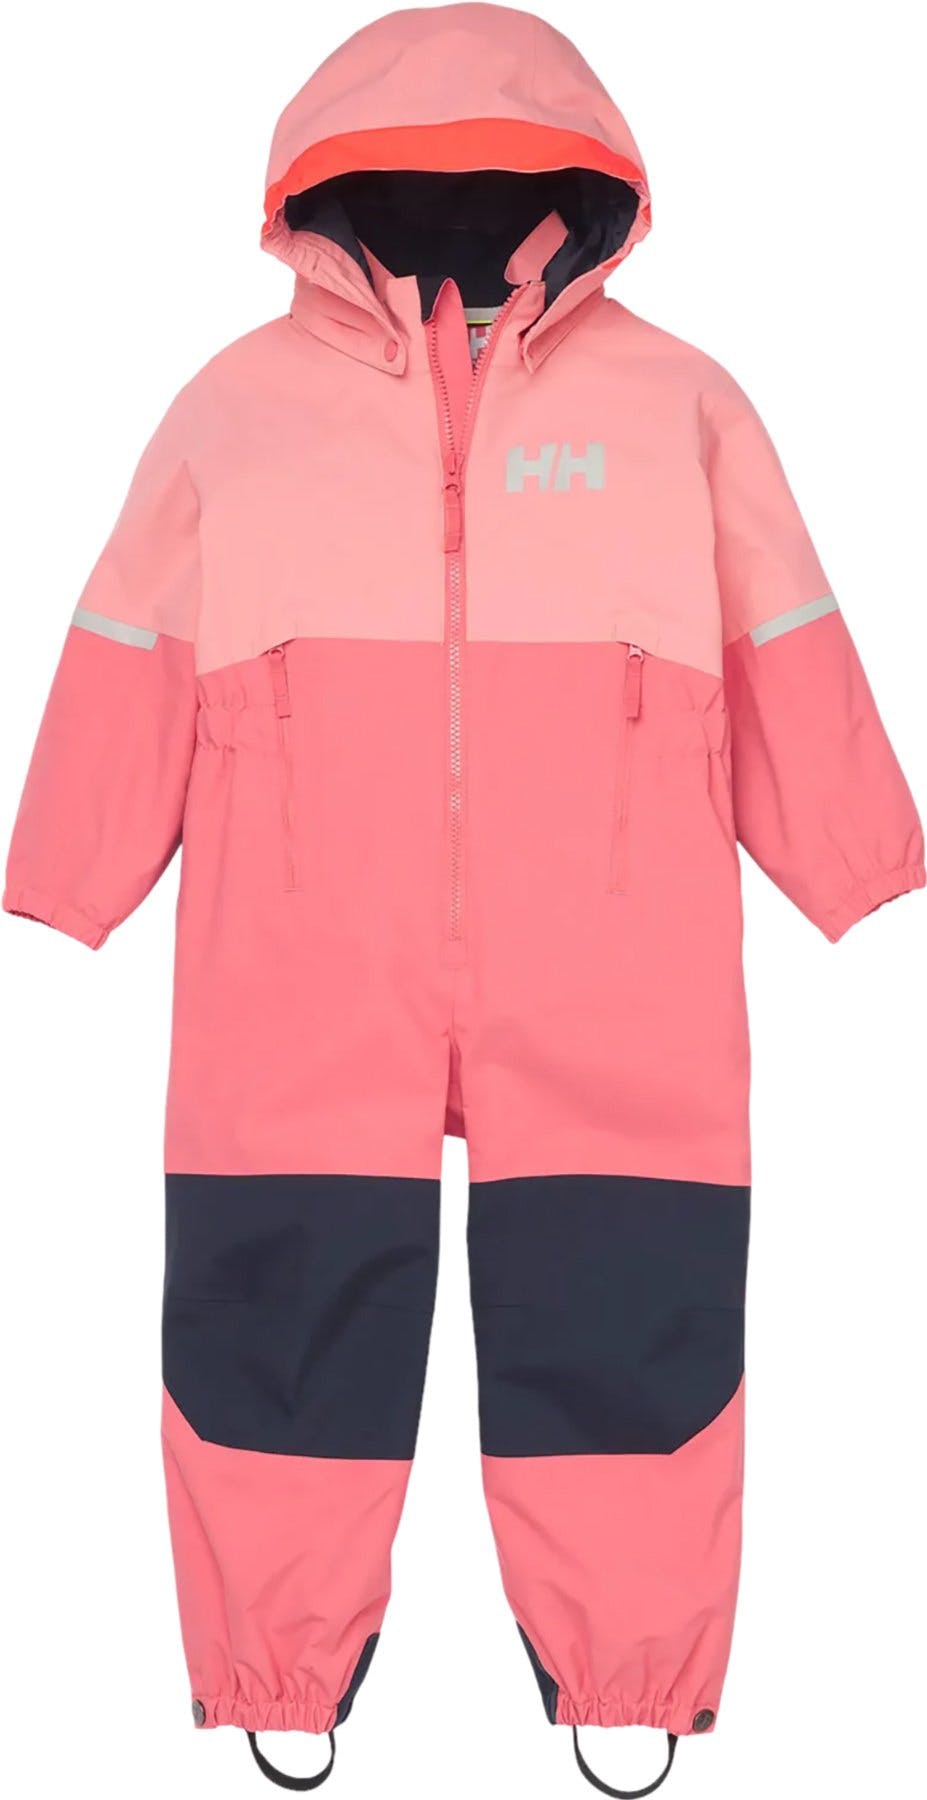 Product image for Storm Waterproof Playsuit - Kids